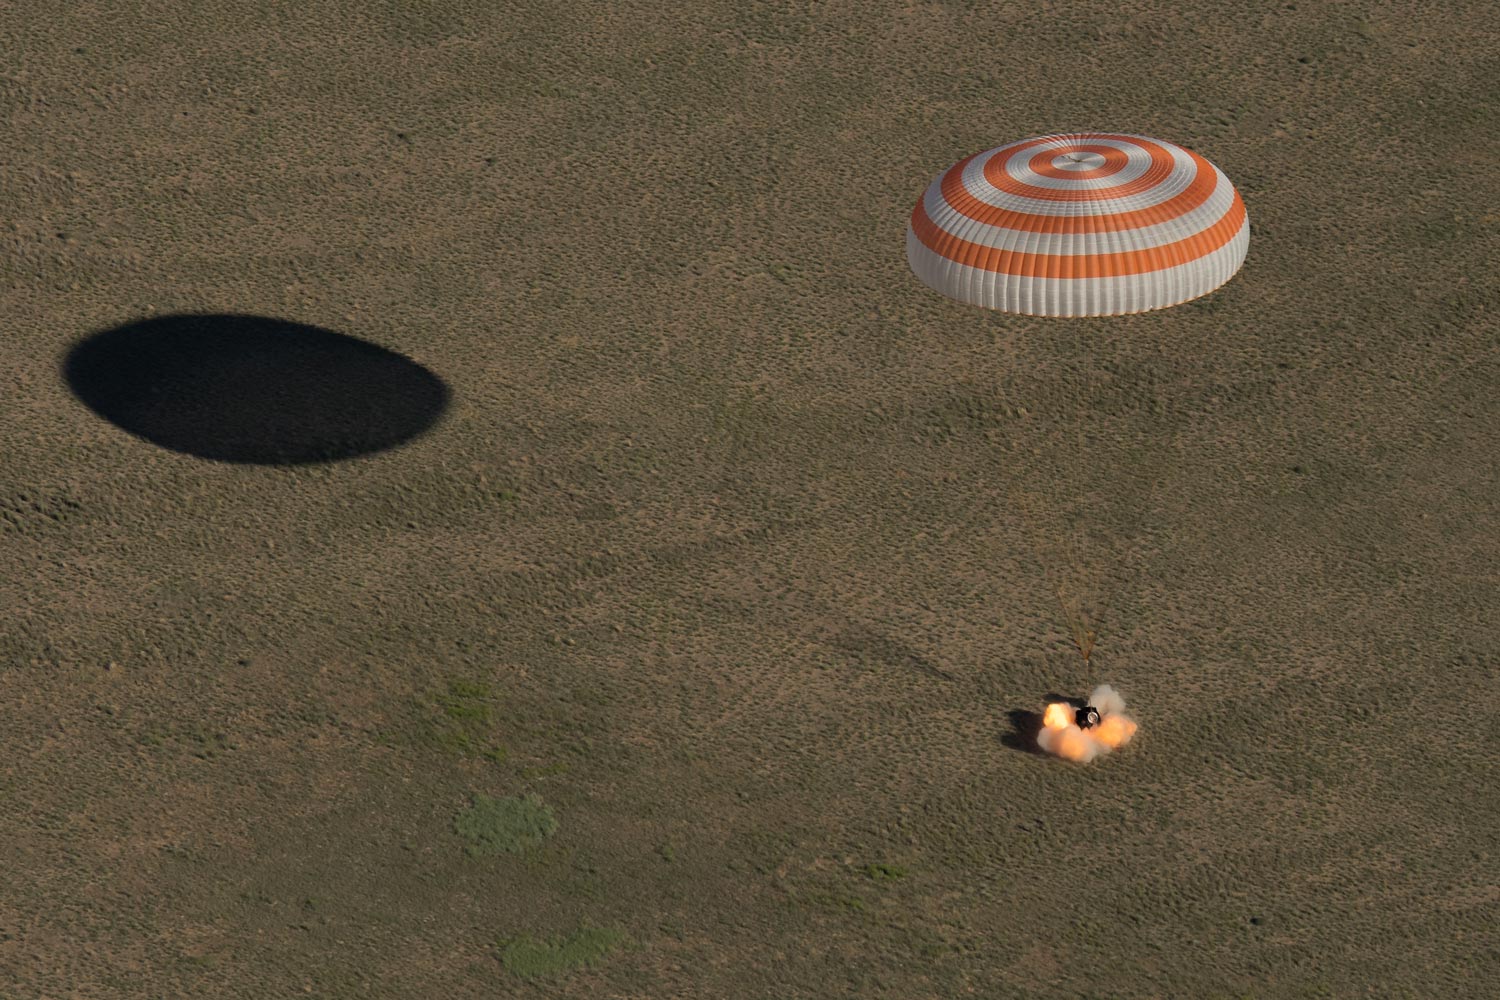 orange and white Parachute hangs above the tingle as it lands on the ground